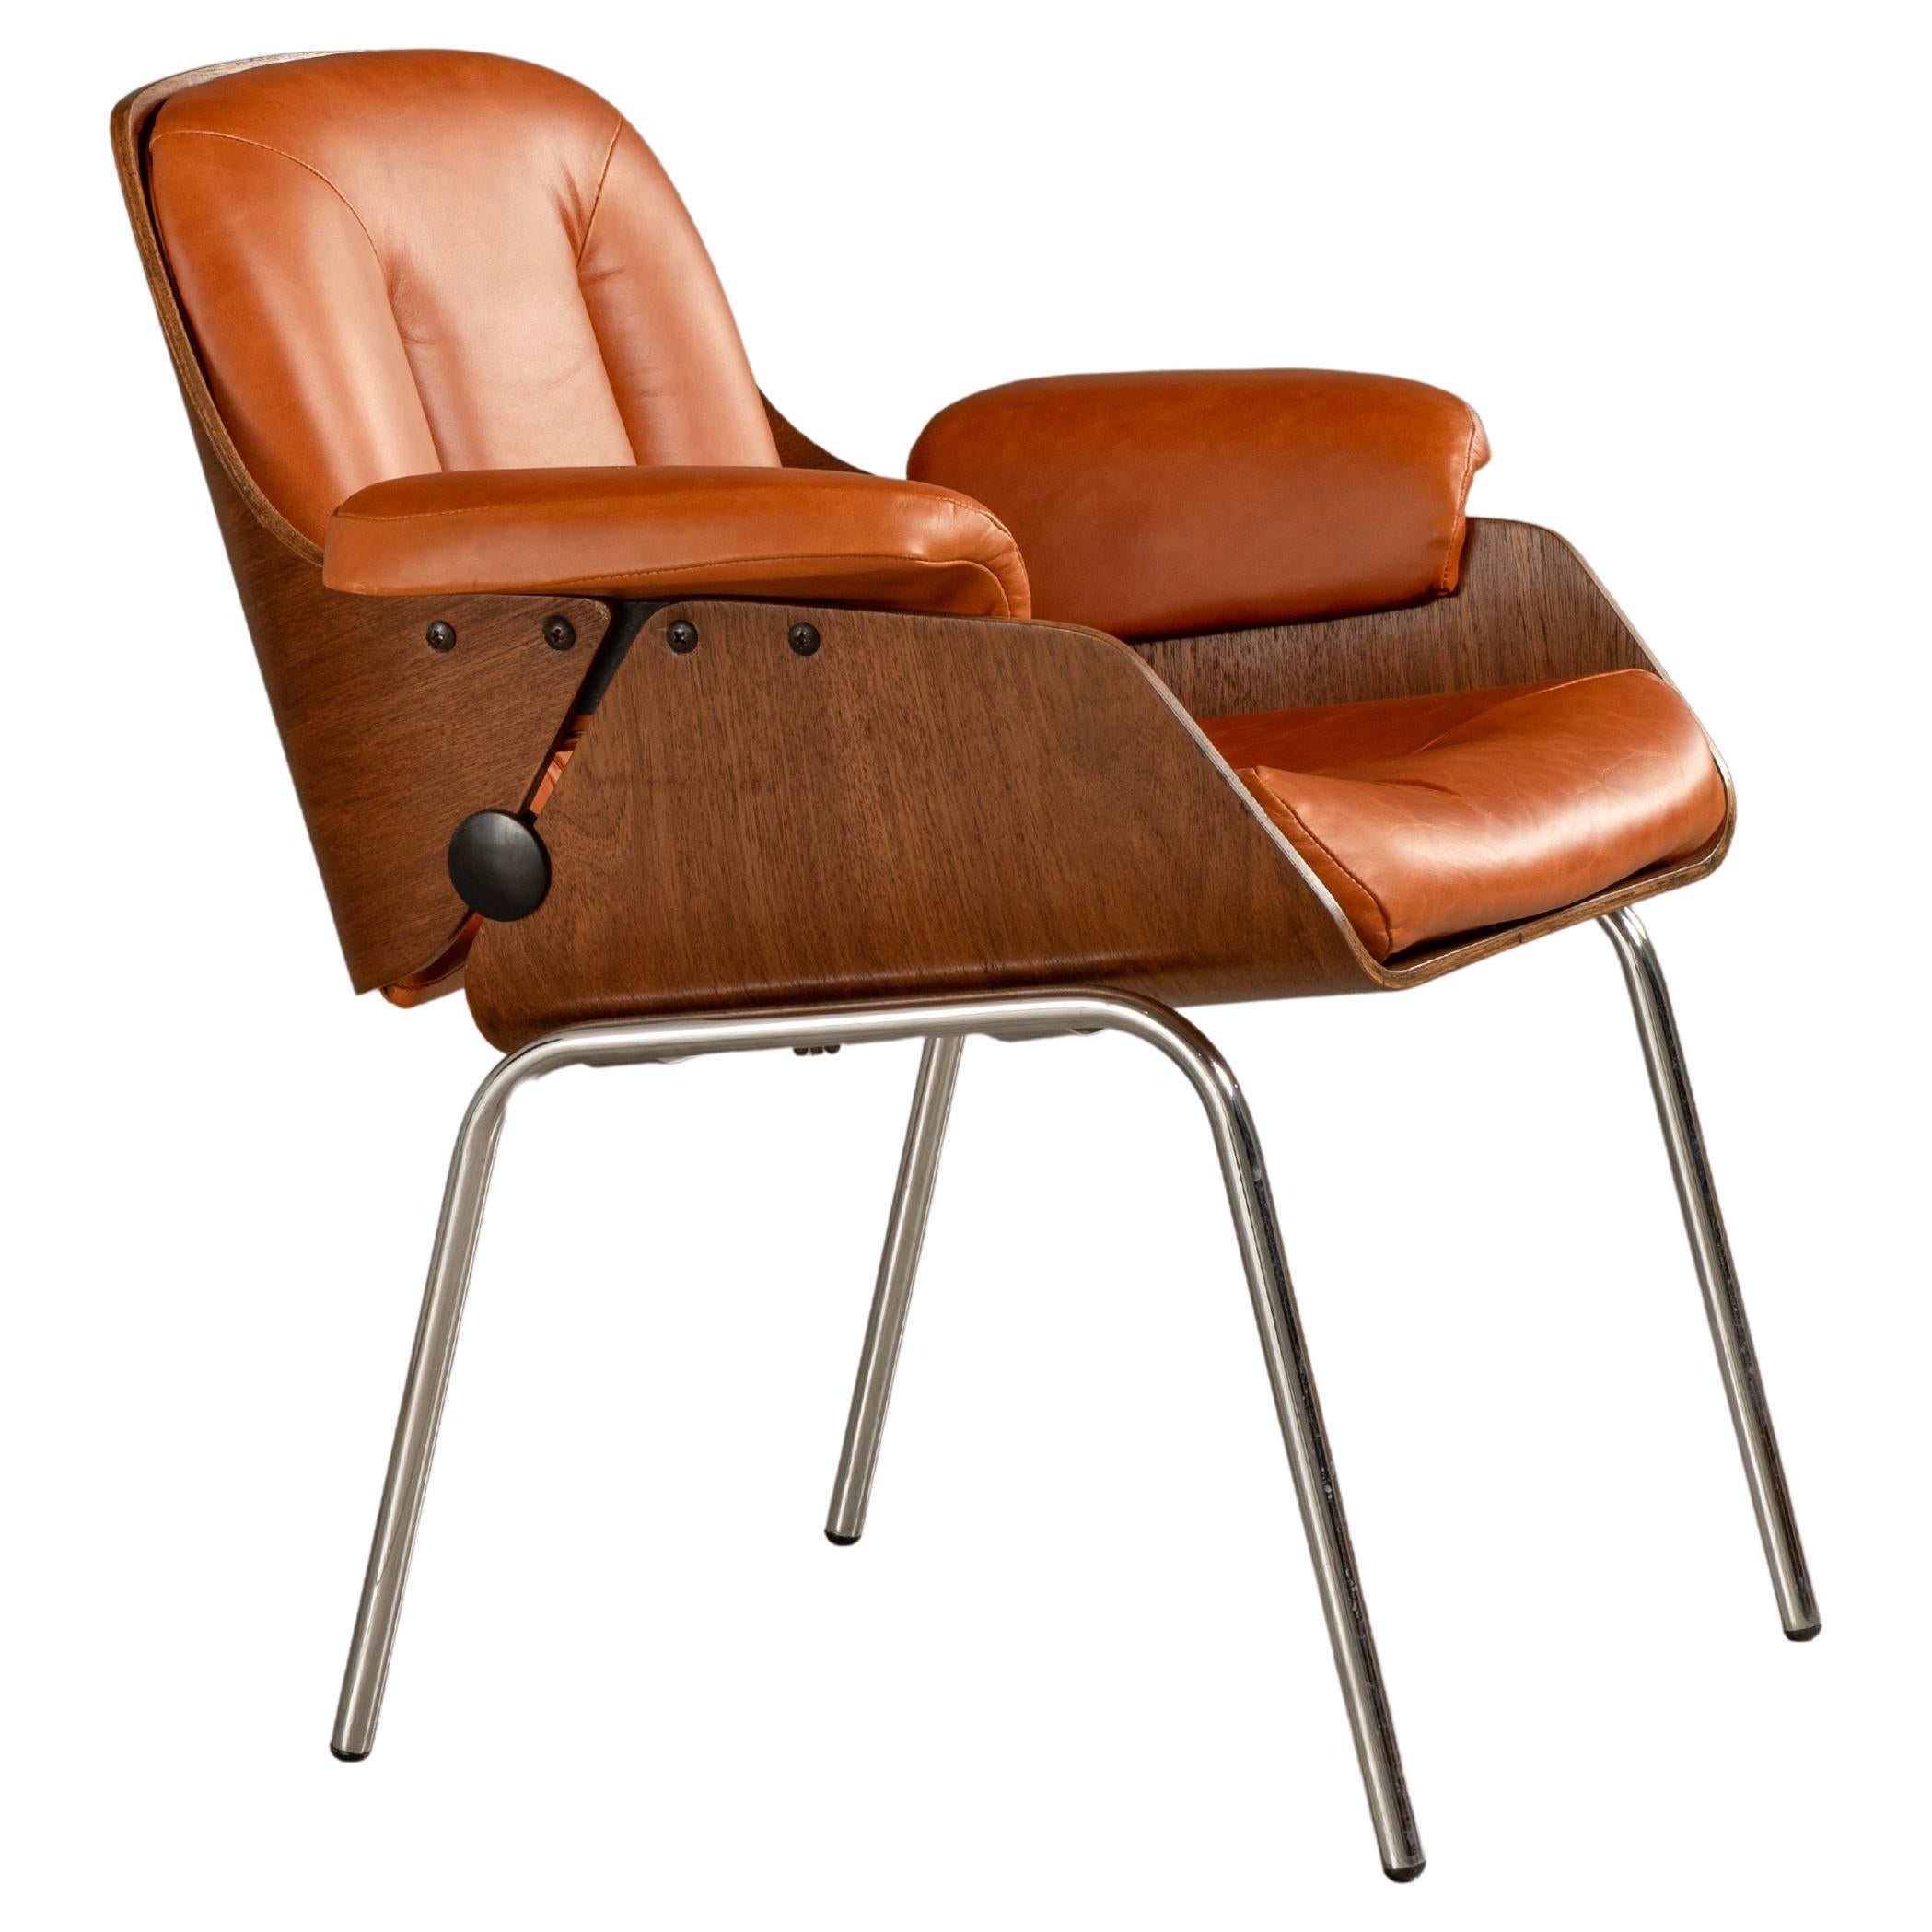 Armchair with Wood, Leather and Steel, by Carlo Fongaro, Brazilian Mid-Century